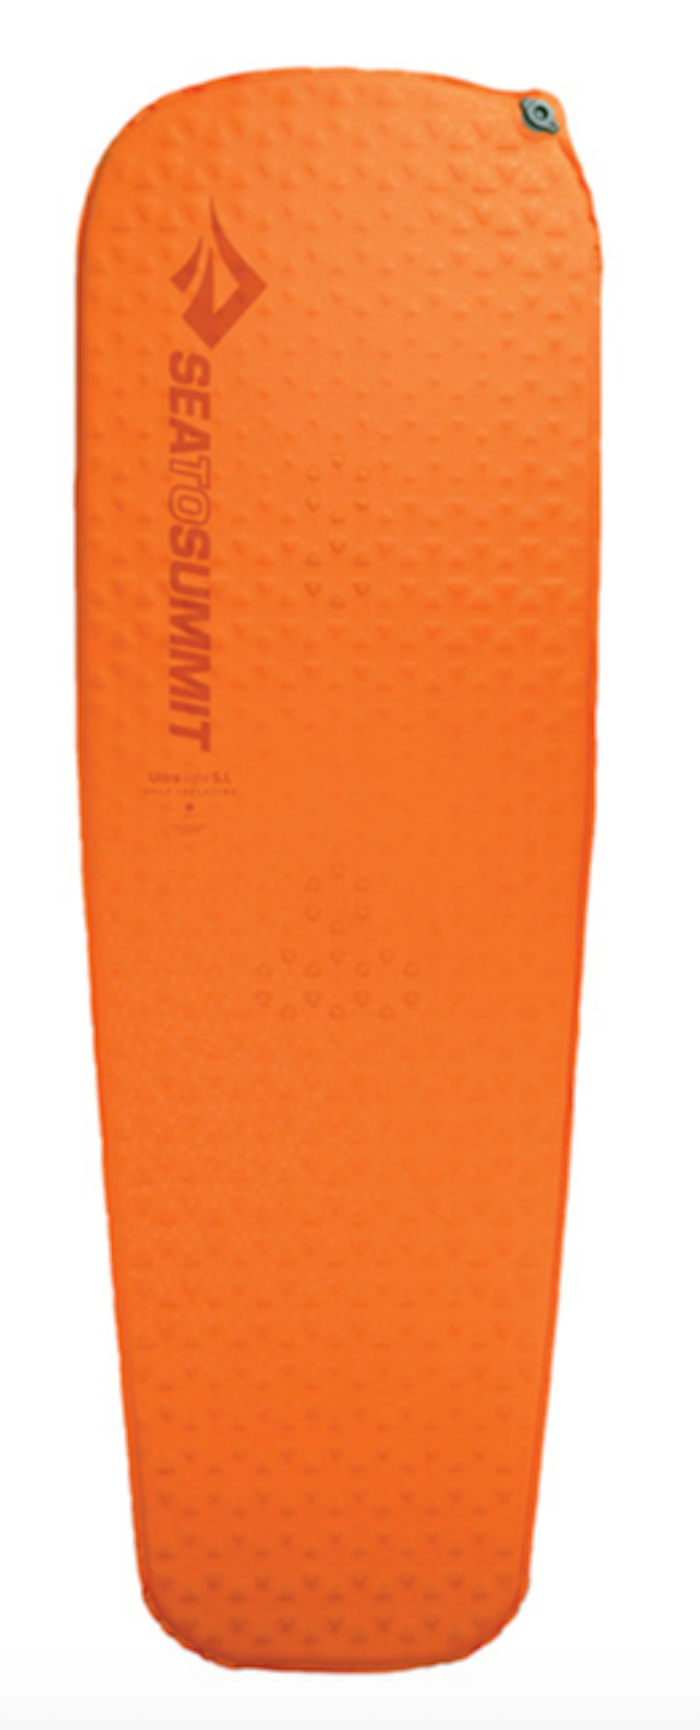 Sea To Summit - Ultralight Self Inflating Mat - Colchoneta autoinflable